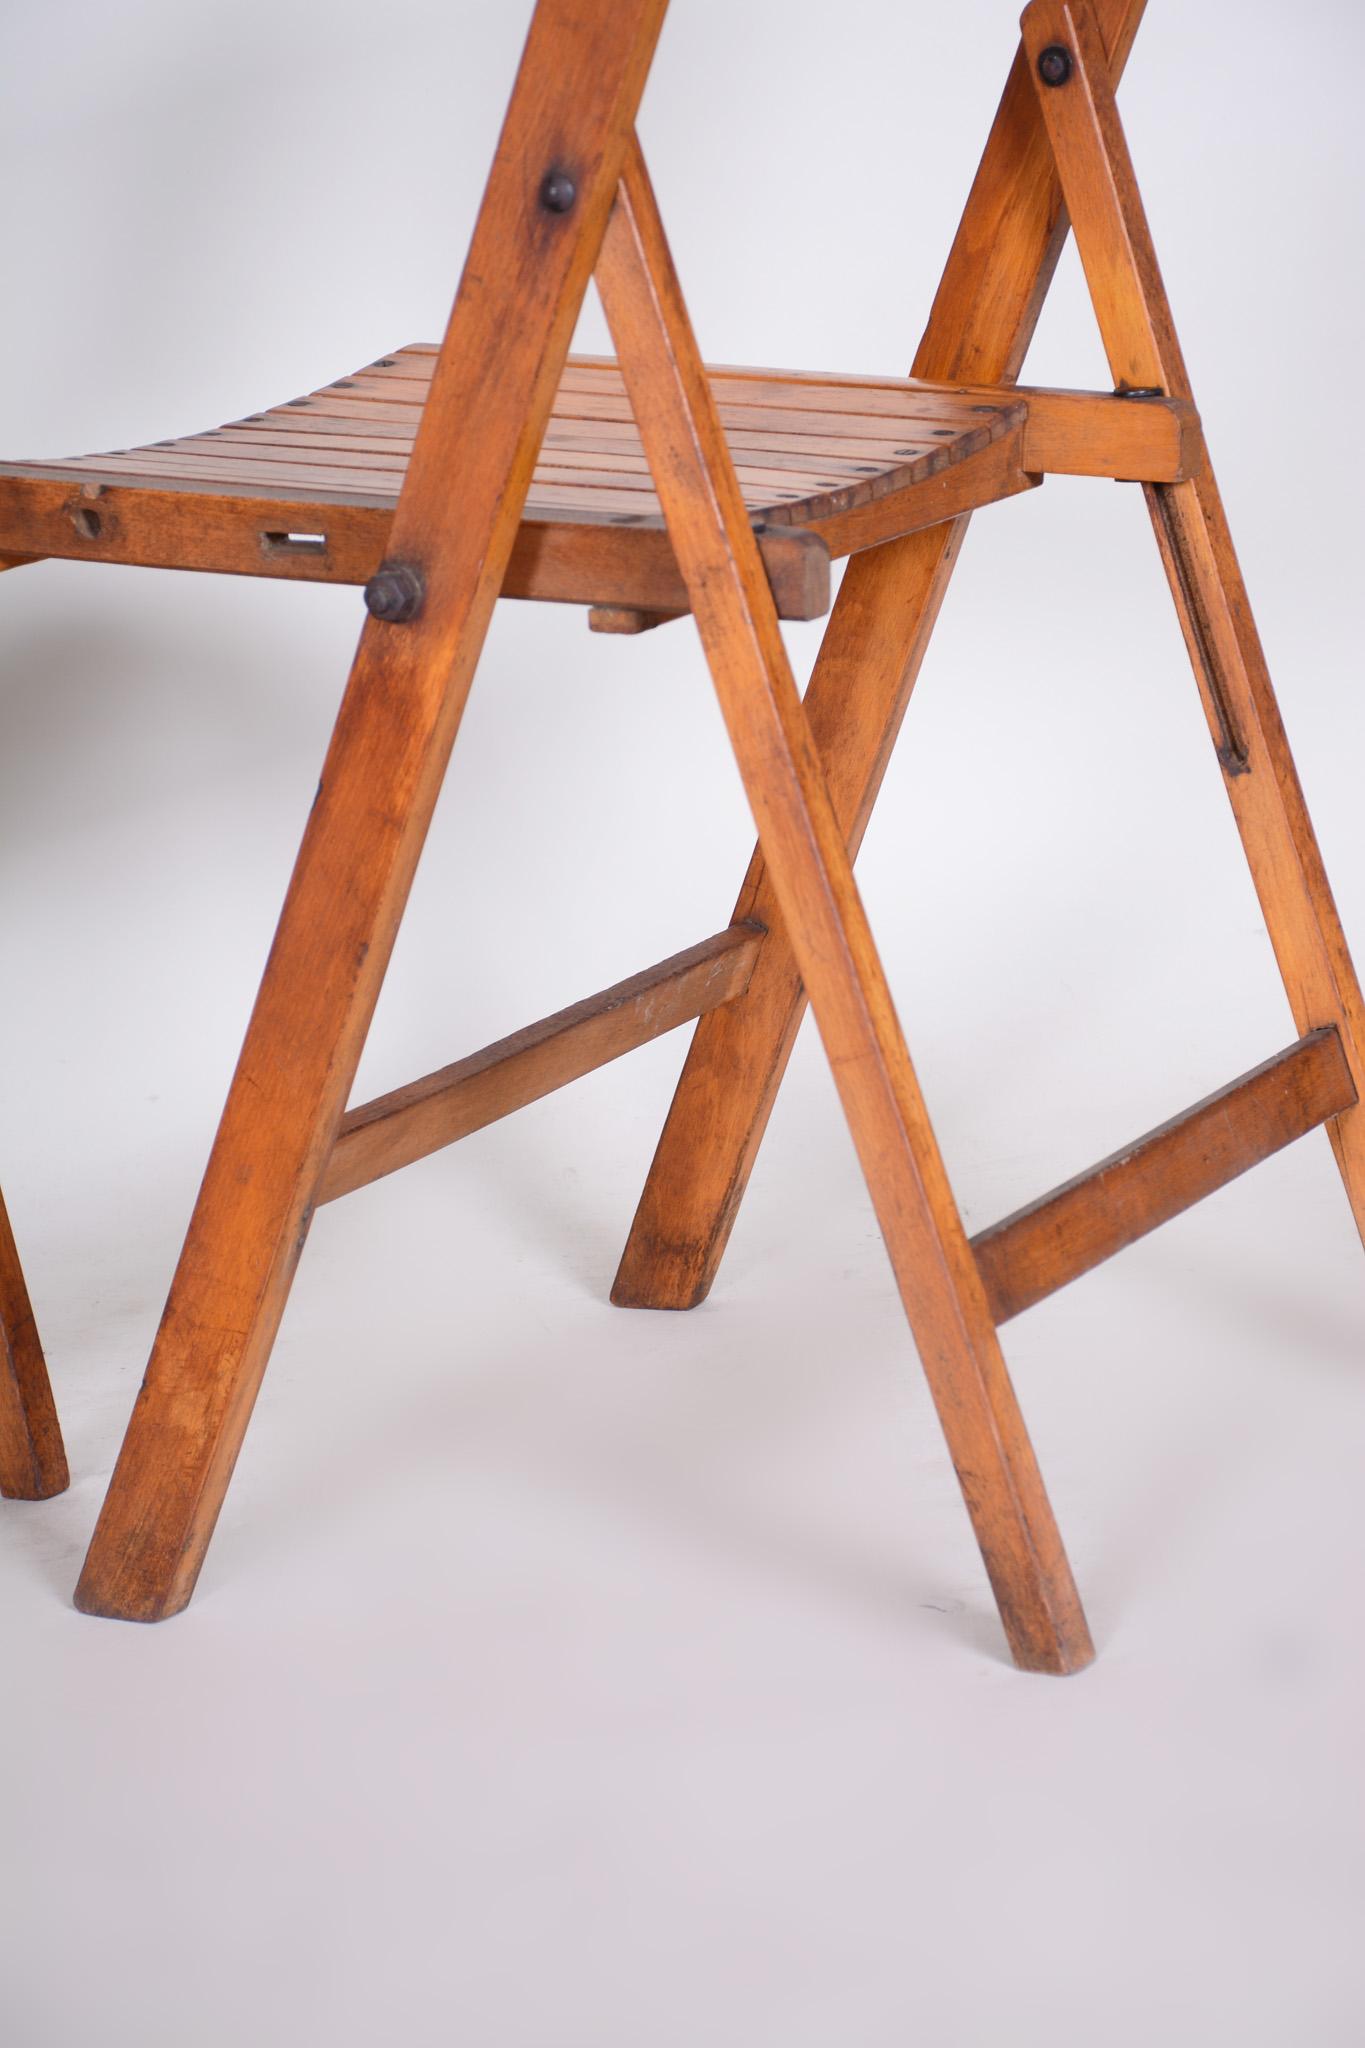 Wood Czech Midcentury Beech Chairs, Original Condition, 1950s, 3 Pieces For Sale